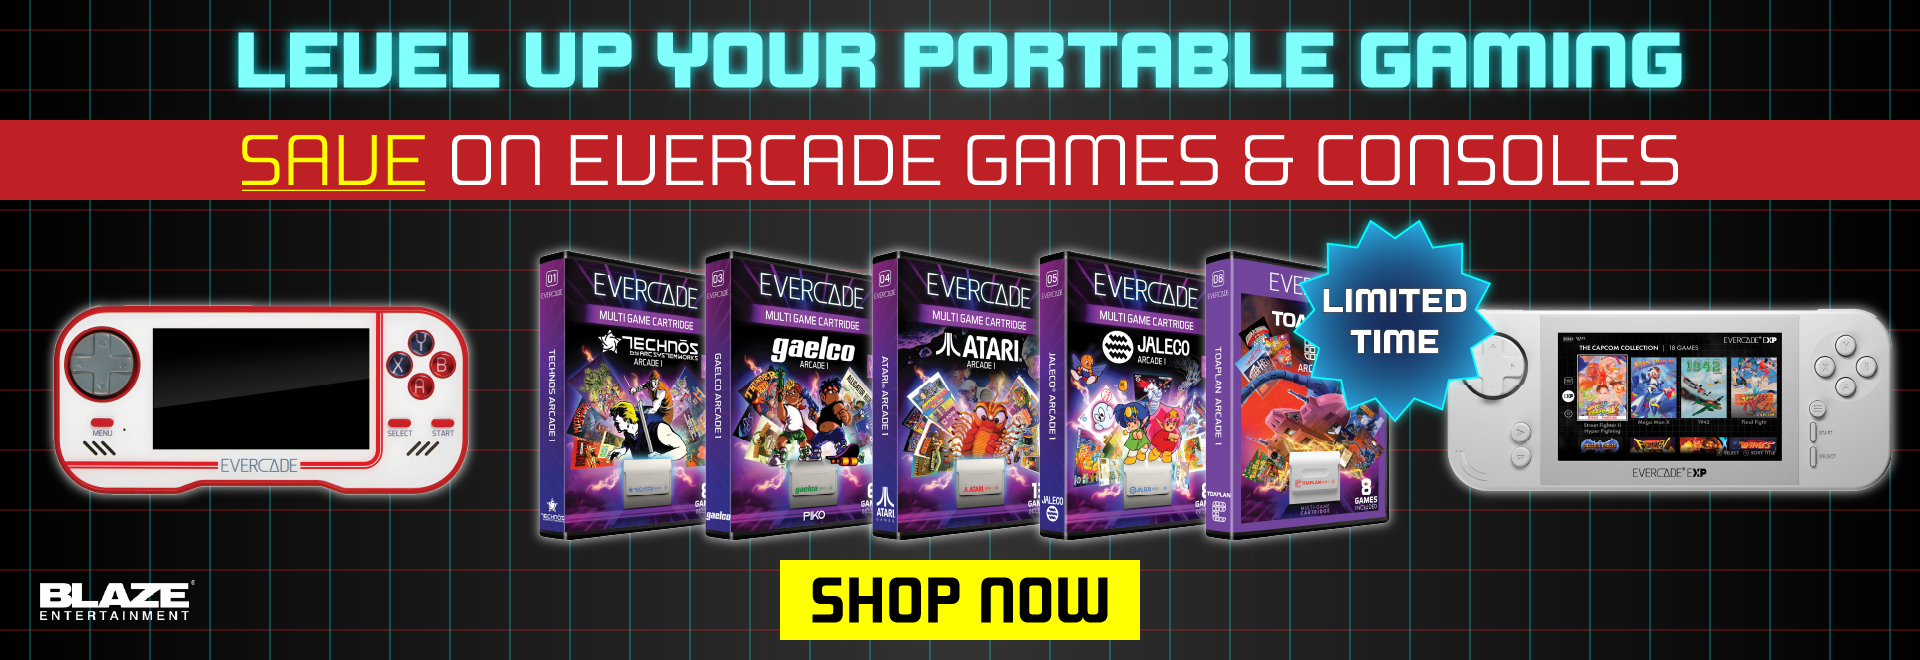 Level up your portable gaming with this Evercade sale!